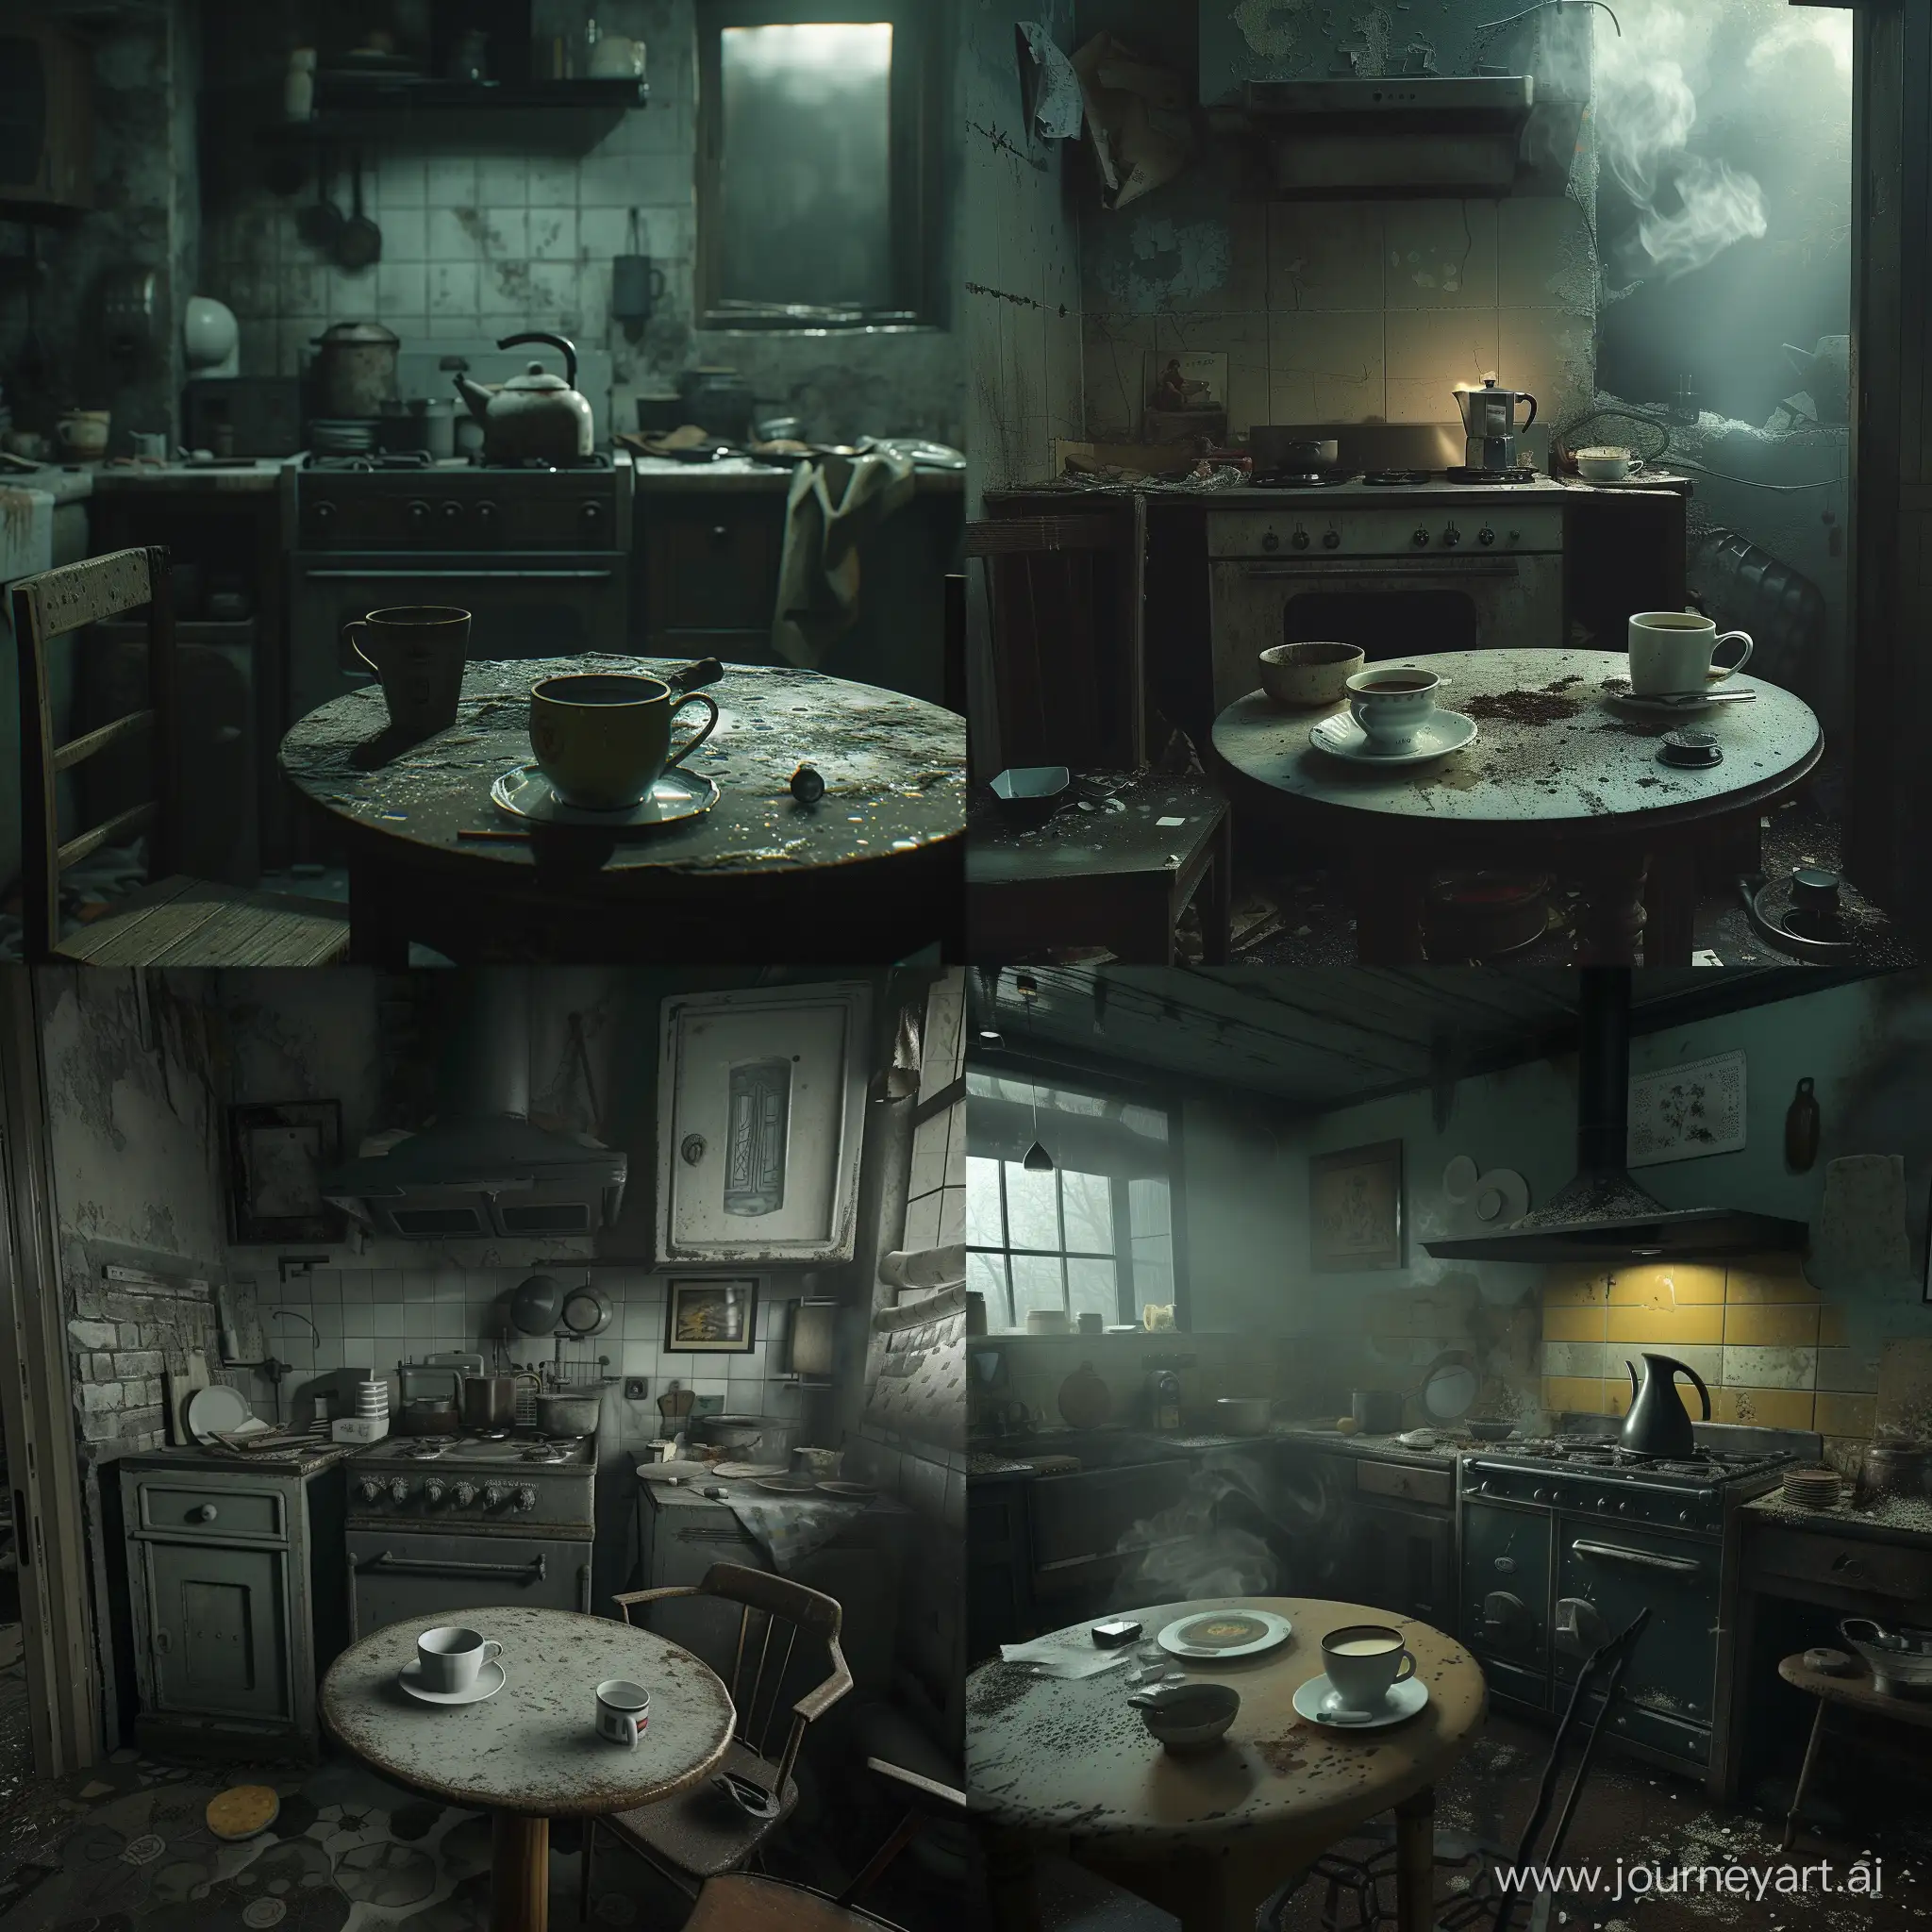 There is a cooker near the table in the very dark and messy kitchen. Thete is a cup of coffee on the table near the cooker. There is a kettle with boiling water on the cooker.